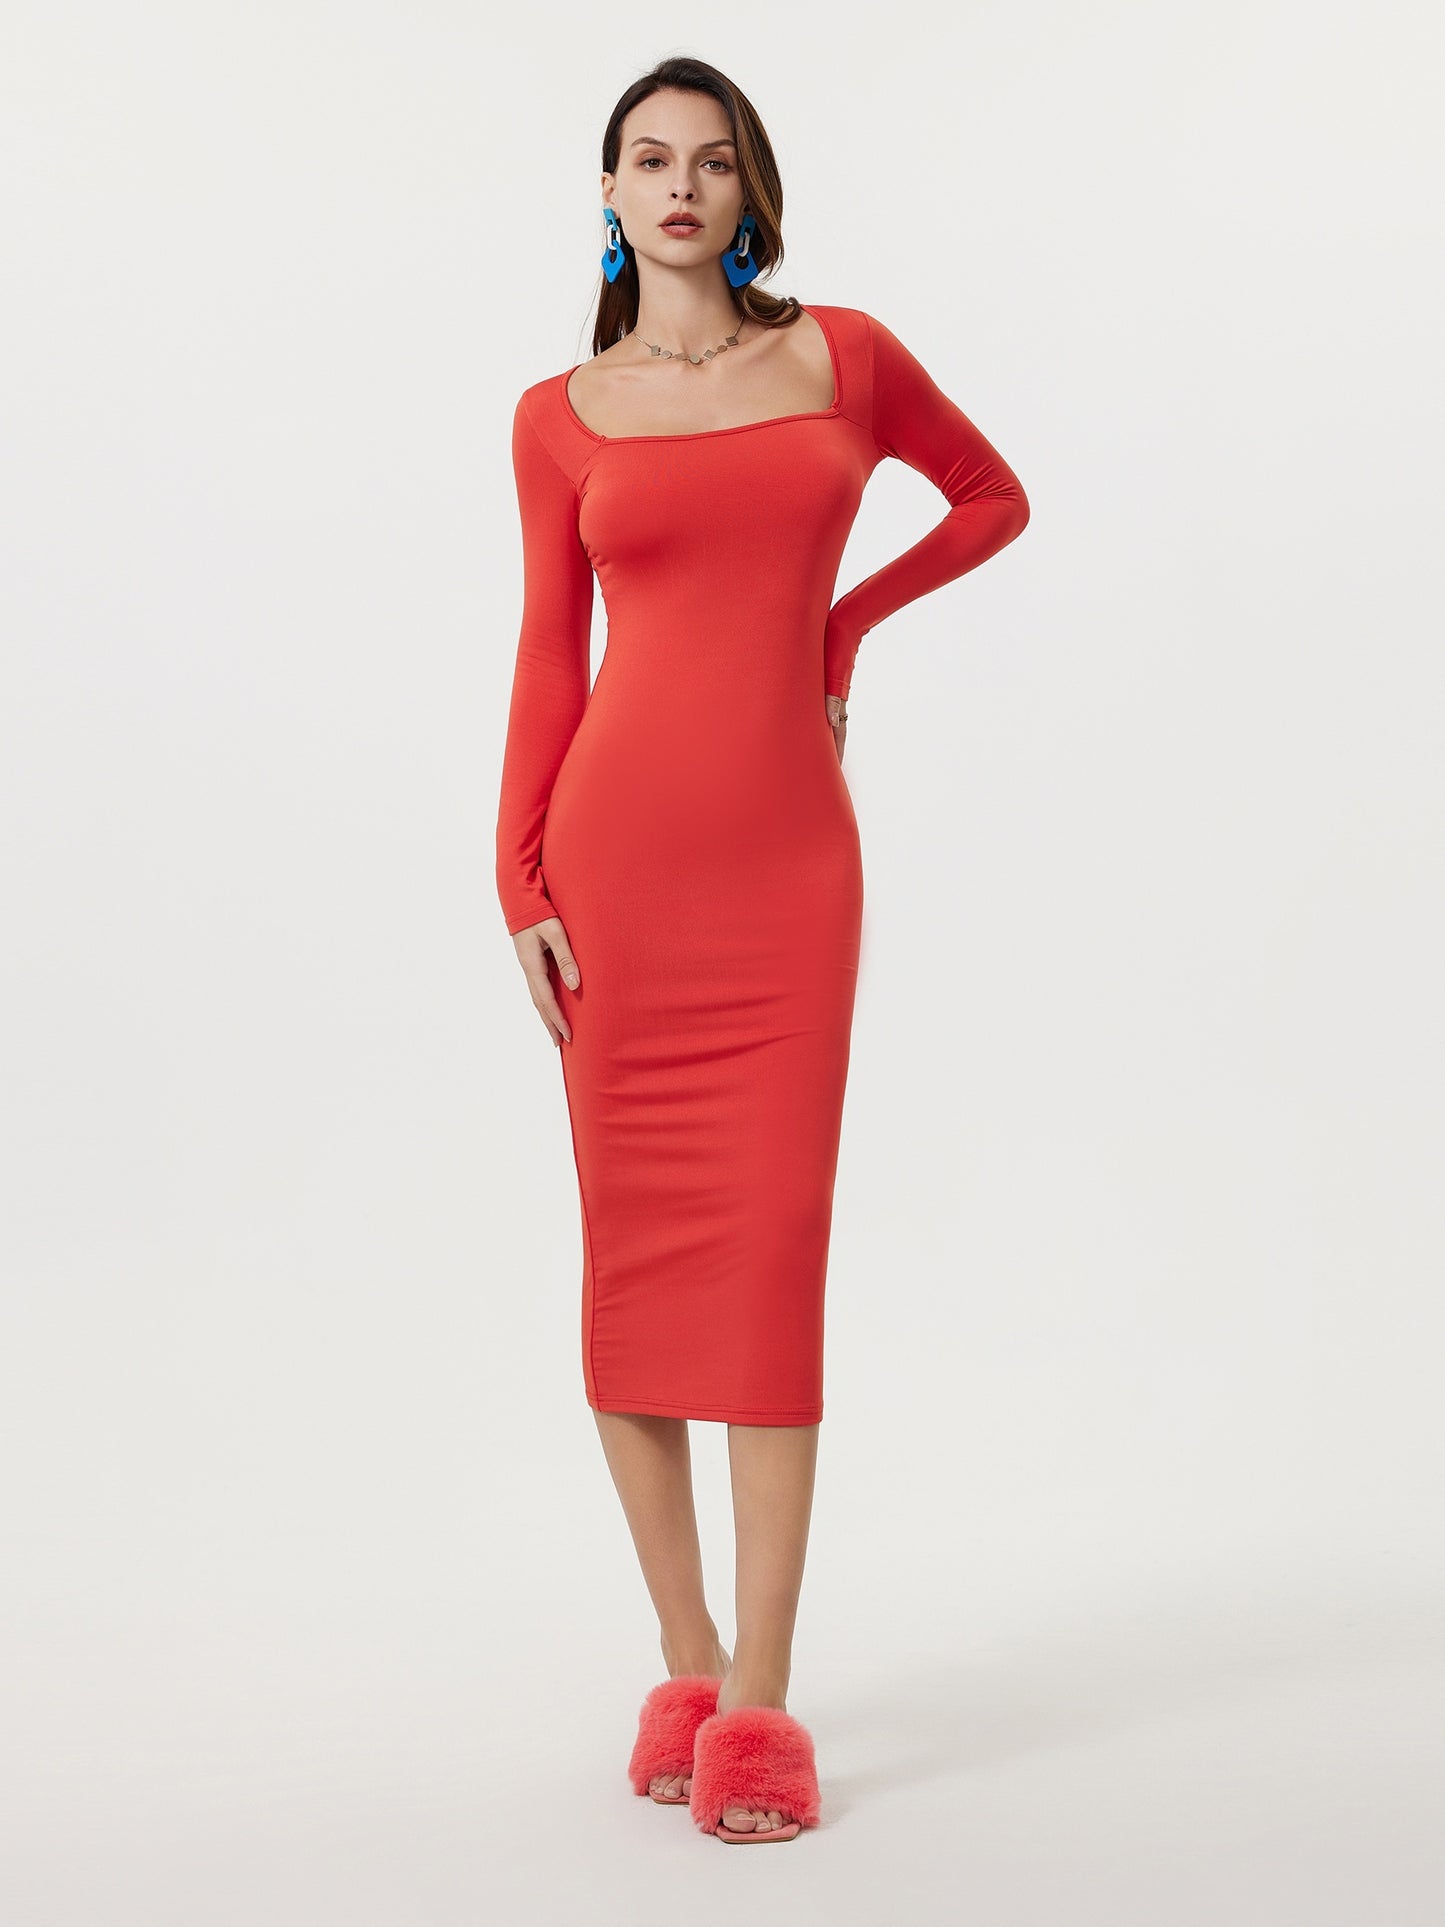 Antmvs Squared Neck Bodycon Dress, Casual Solid Long Sleeve Midi Dress, Women's Clothing